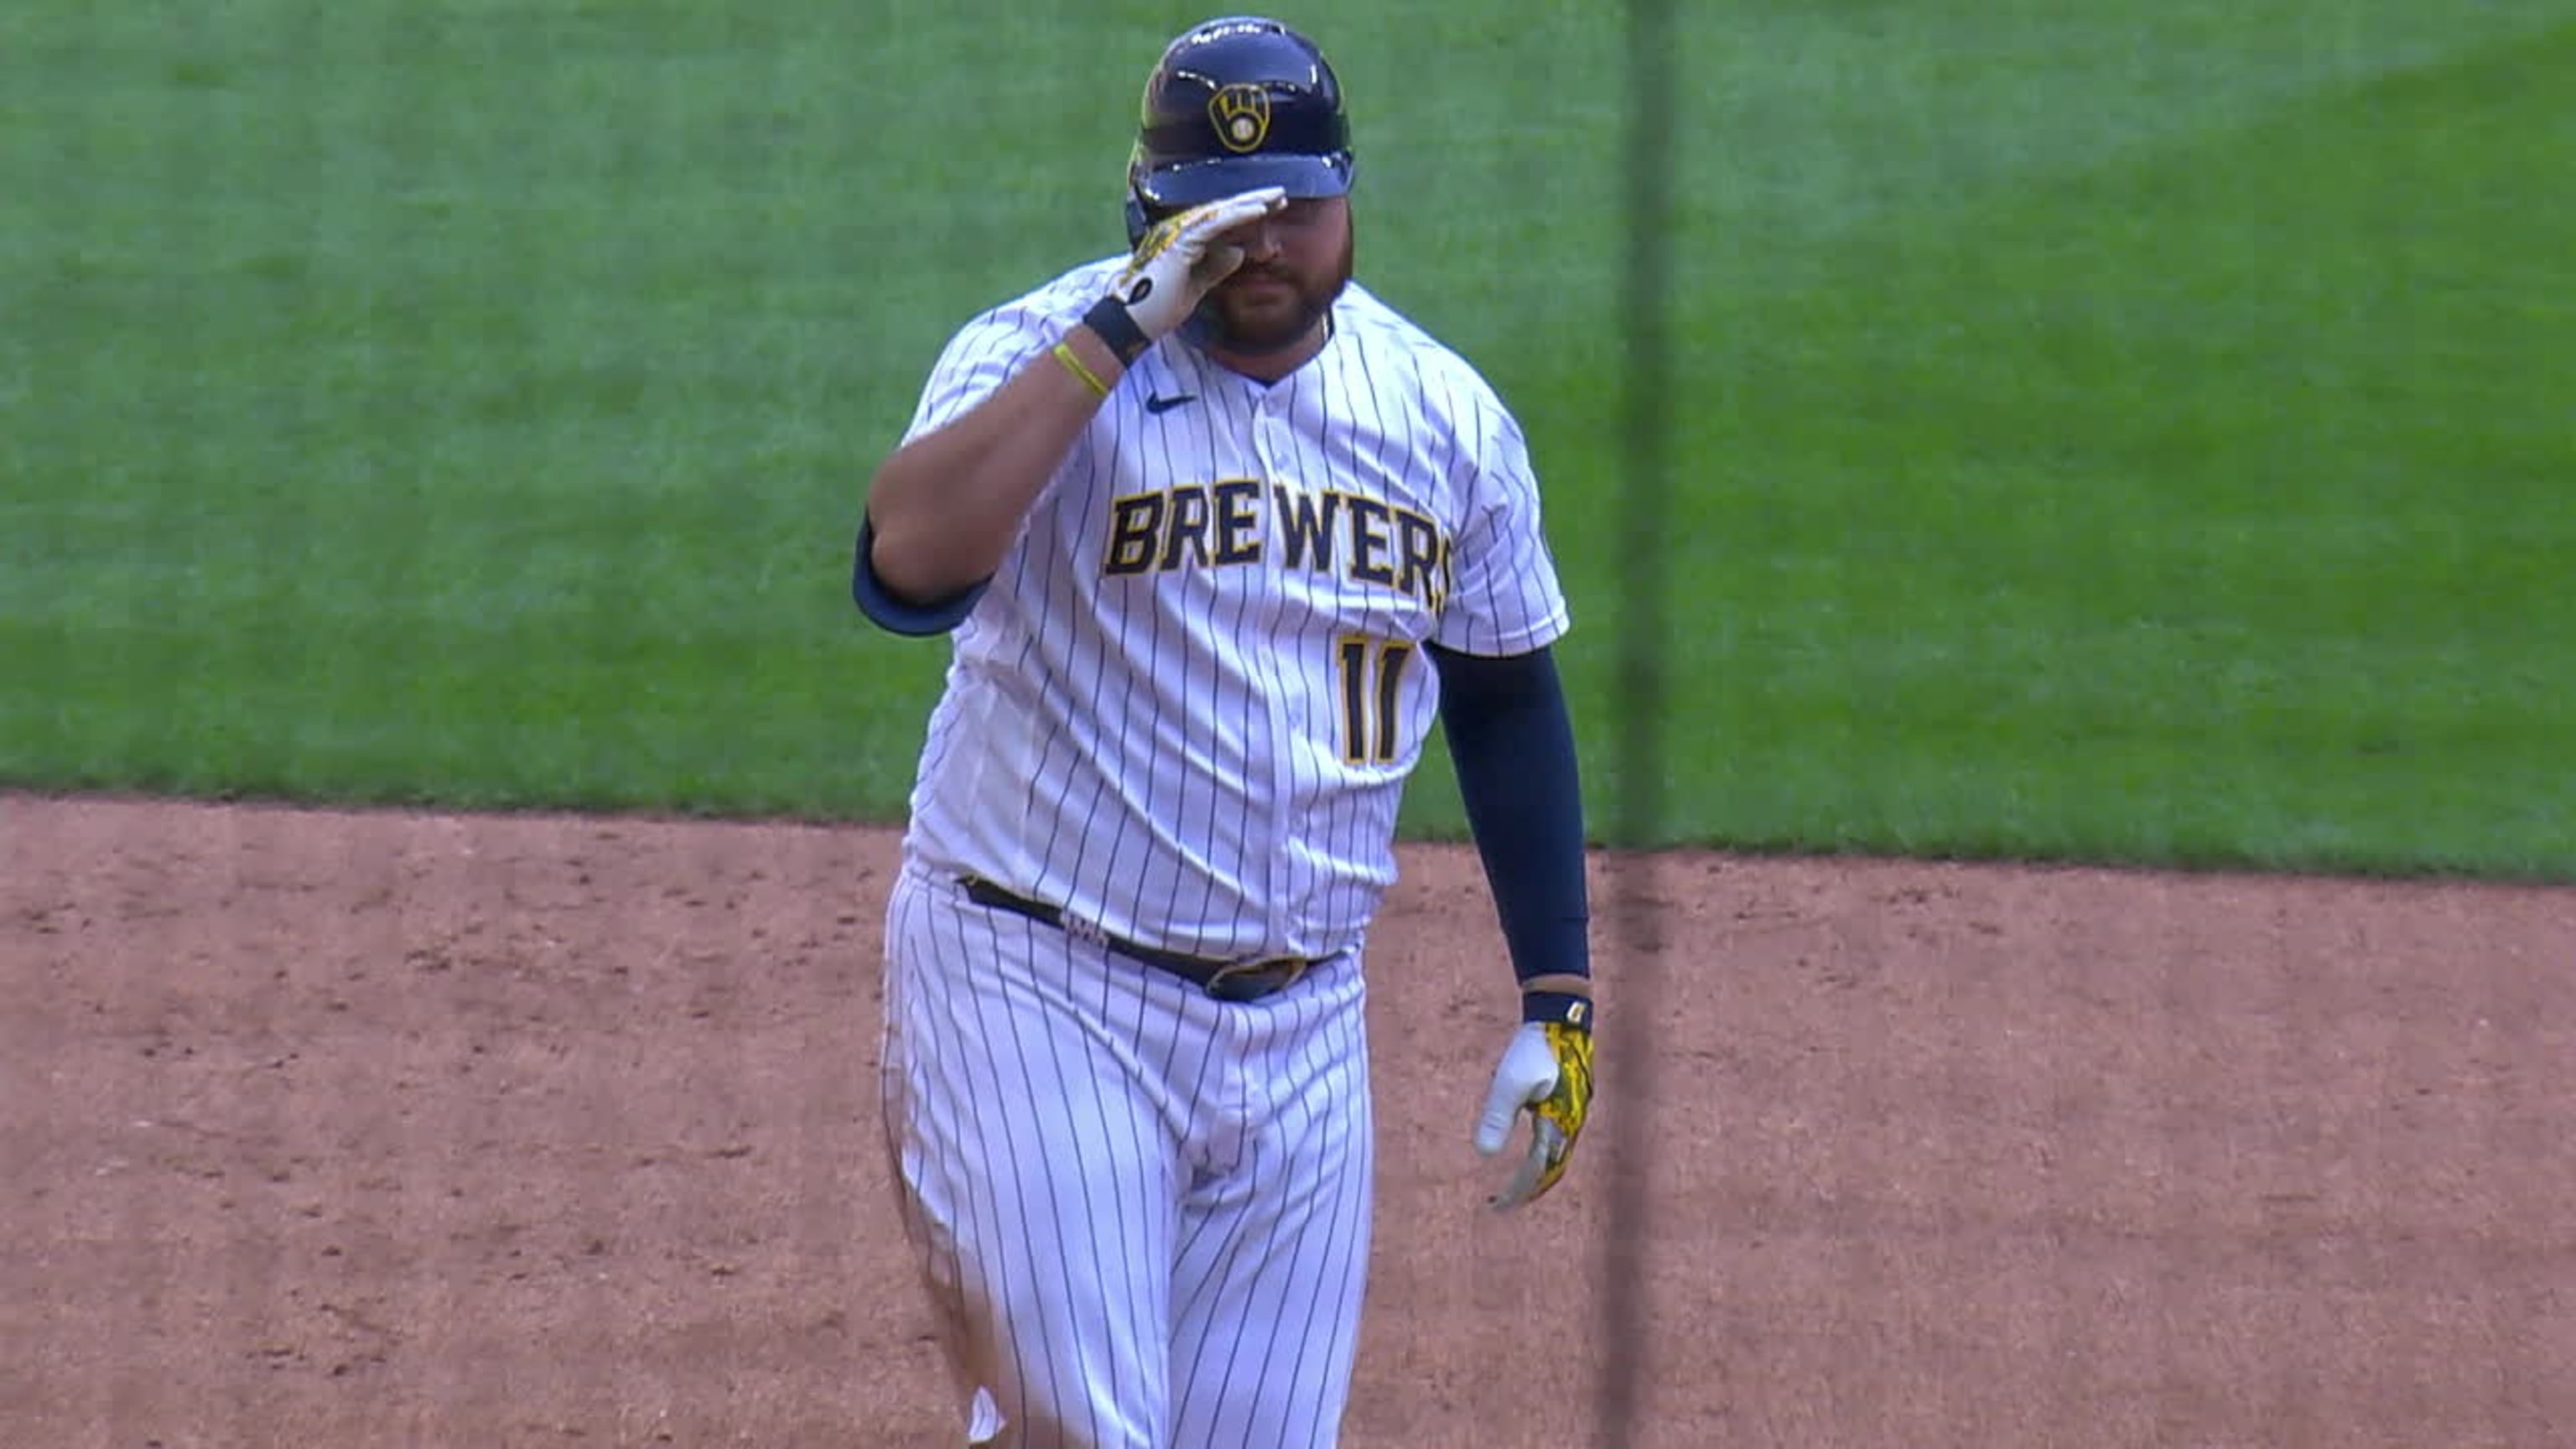 Brewers: Forget The Platoon, Rowdy Tellez Deserves To Play Every Day